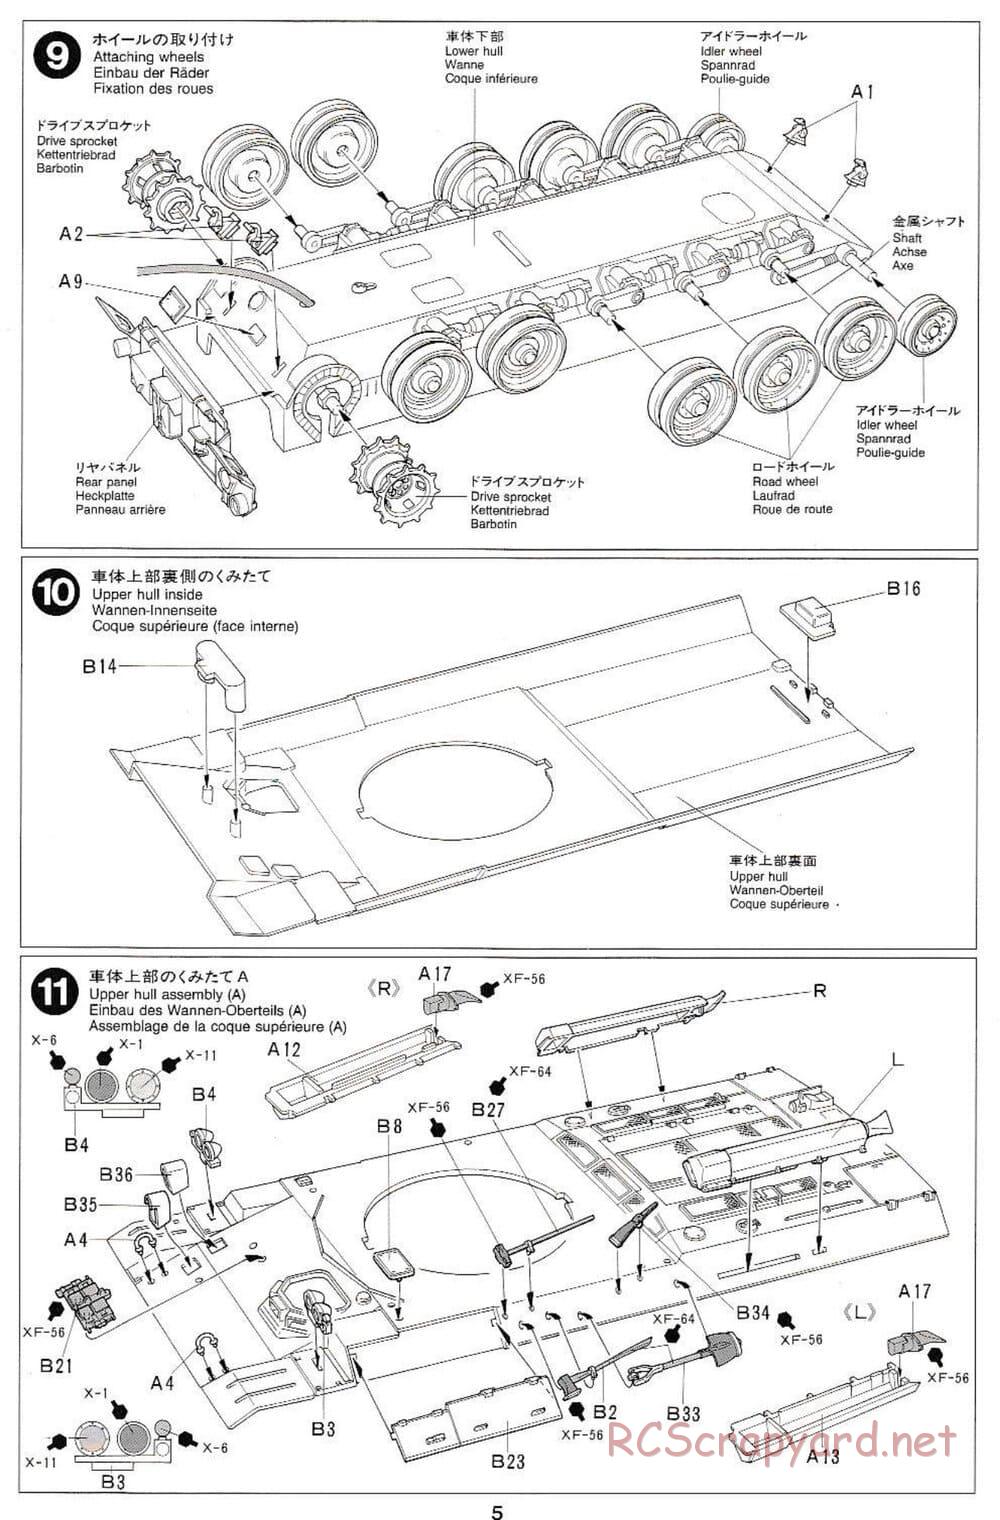 Tamiya - J.G.S.D.F. Type 74 - 1/35 Scale Chassis - Manual - Page 5